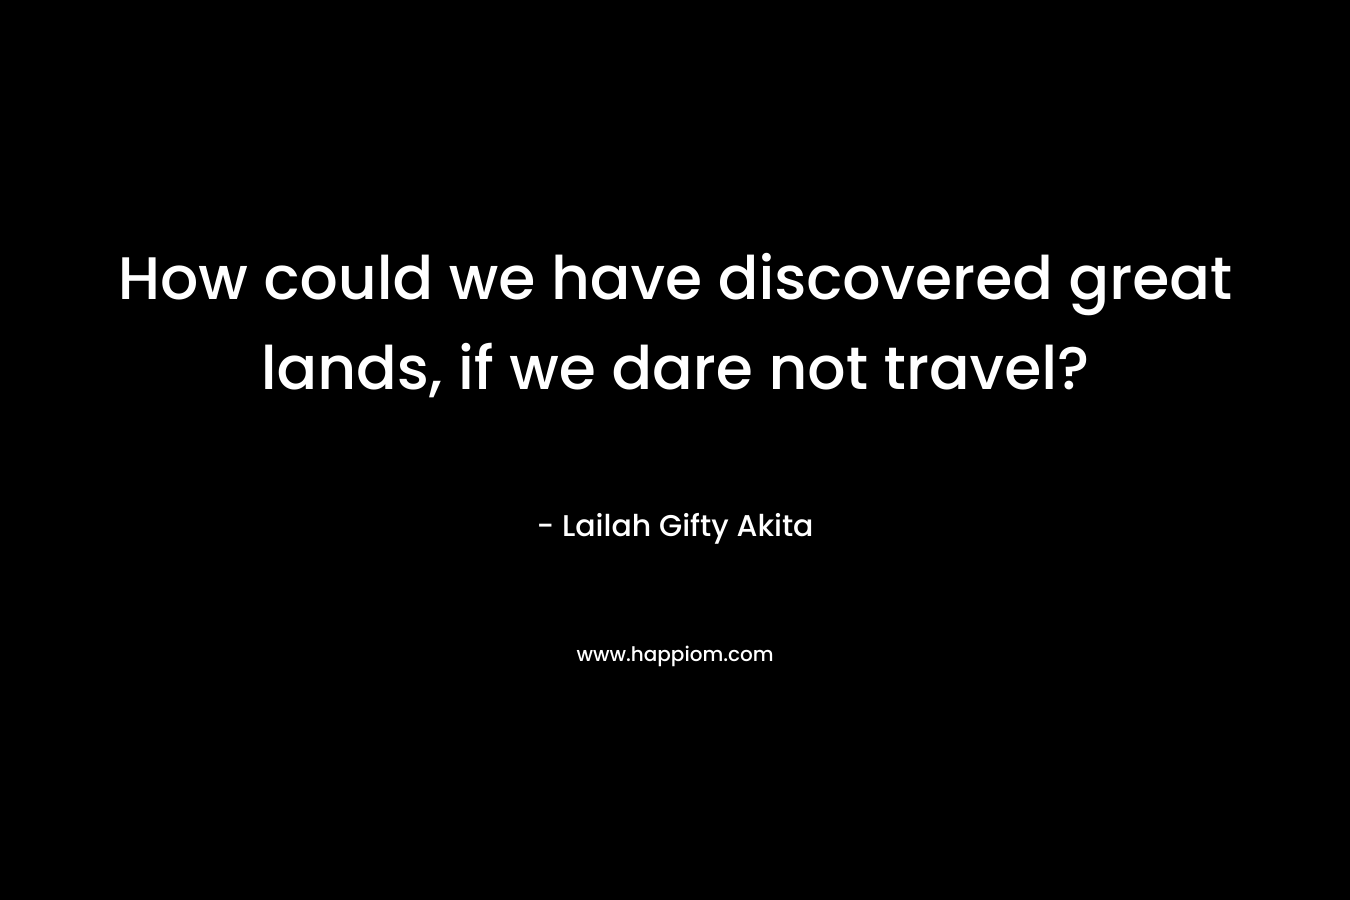 How could we have discovered great lands, if we dare not travel?